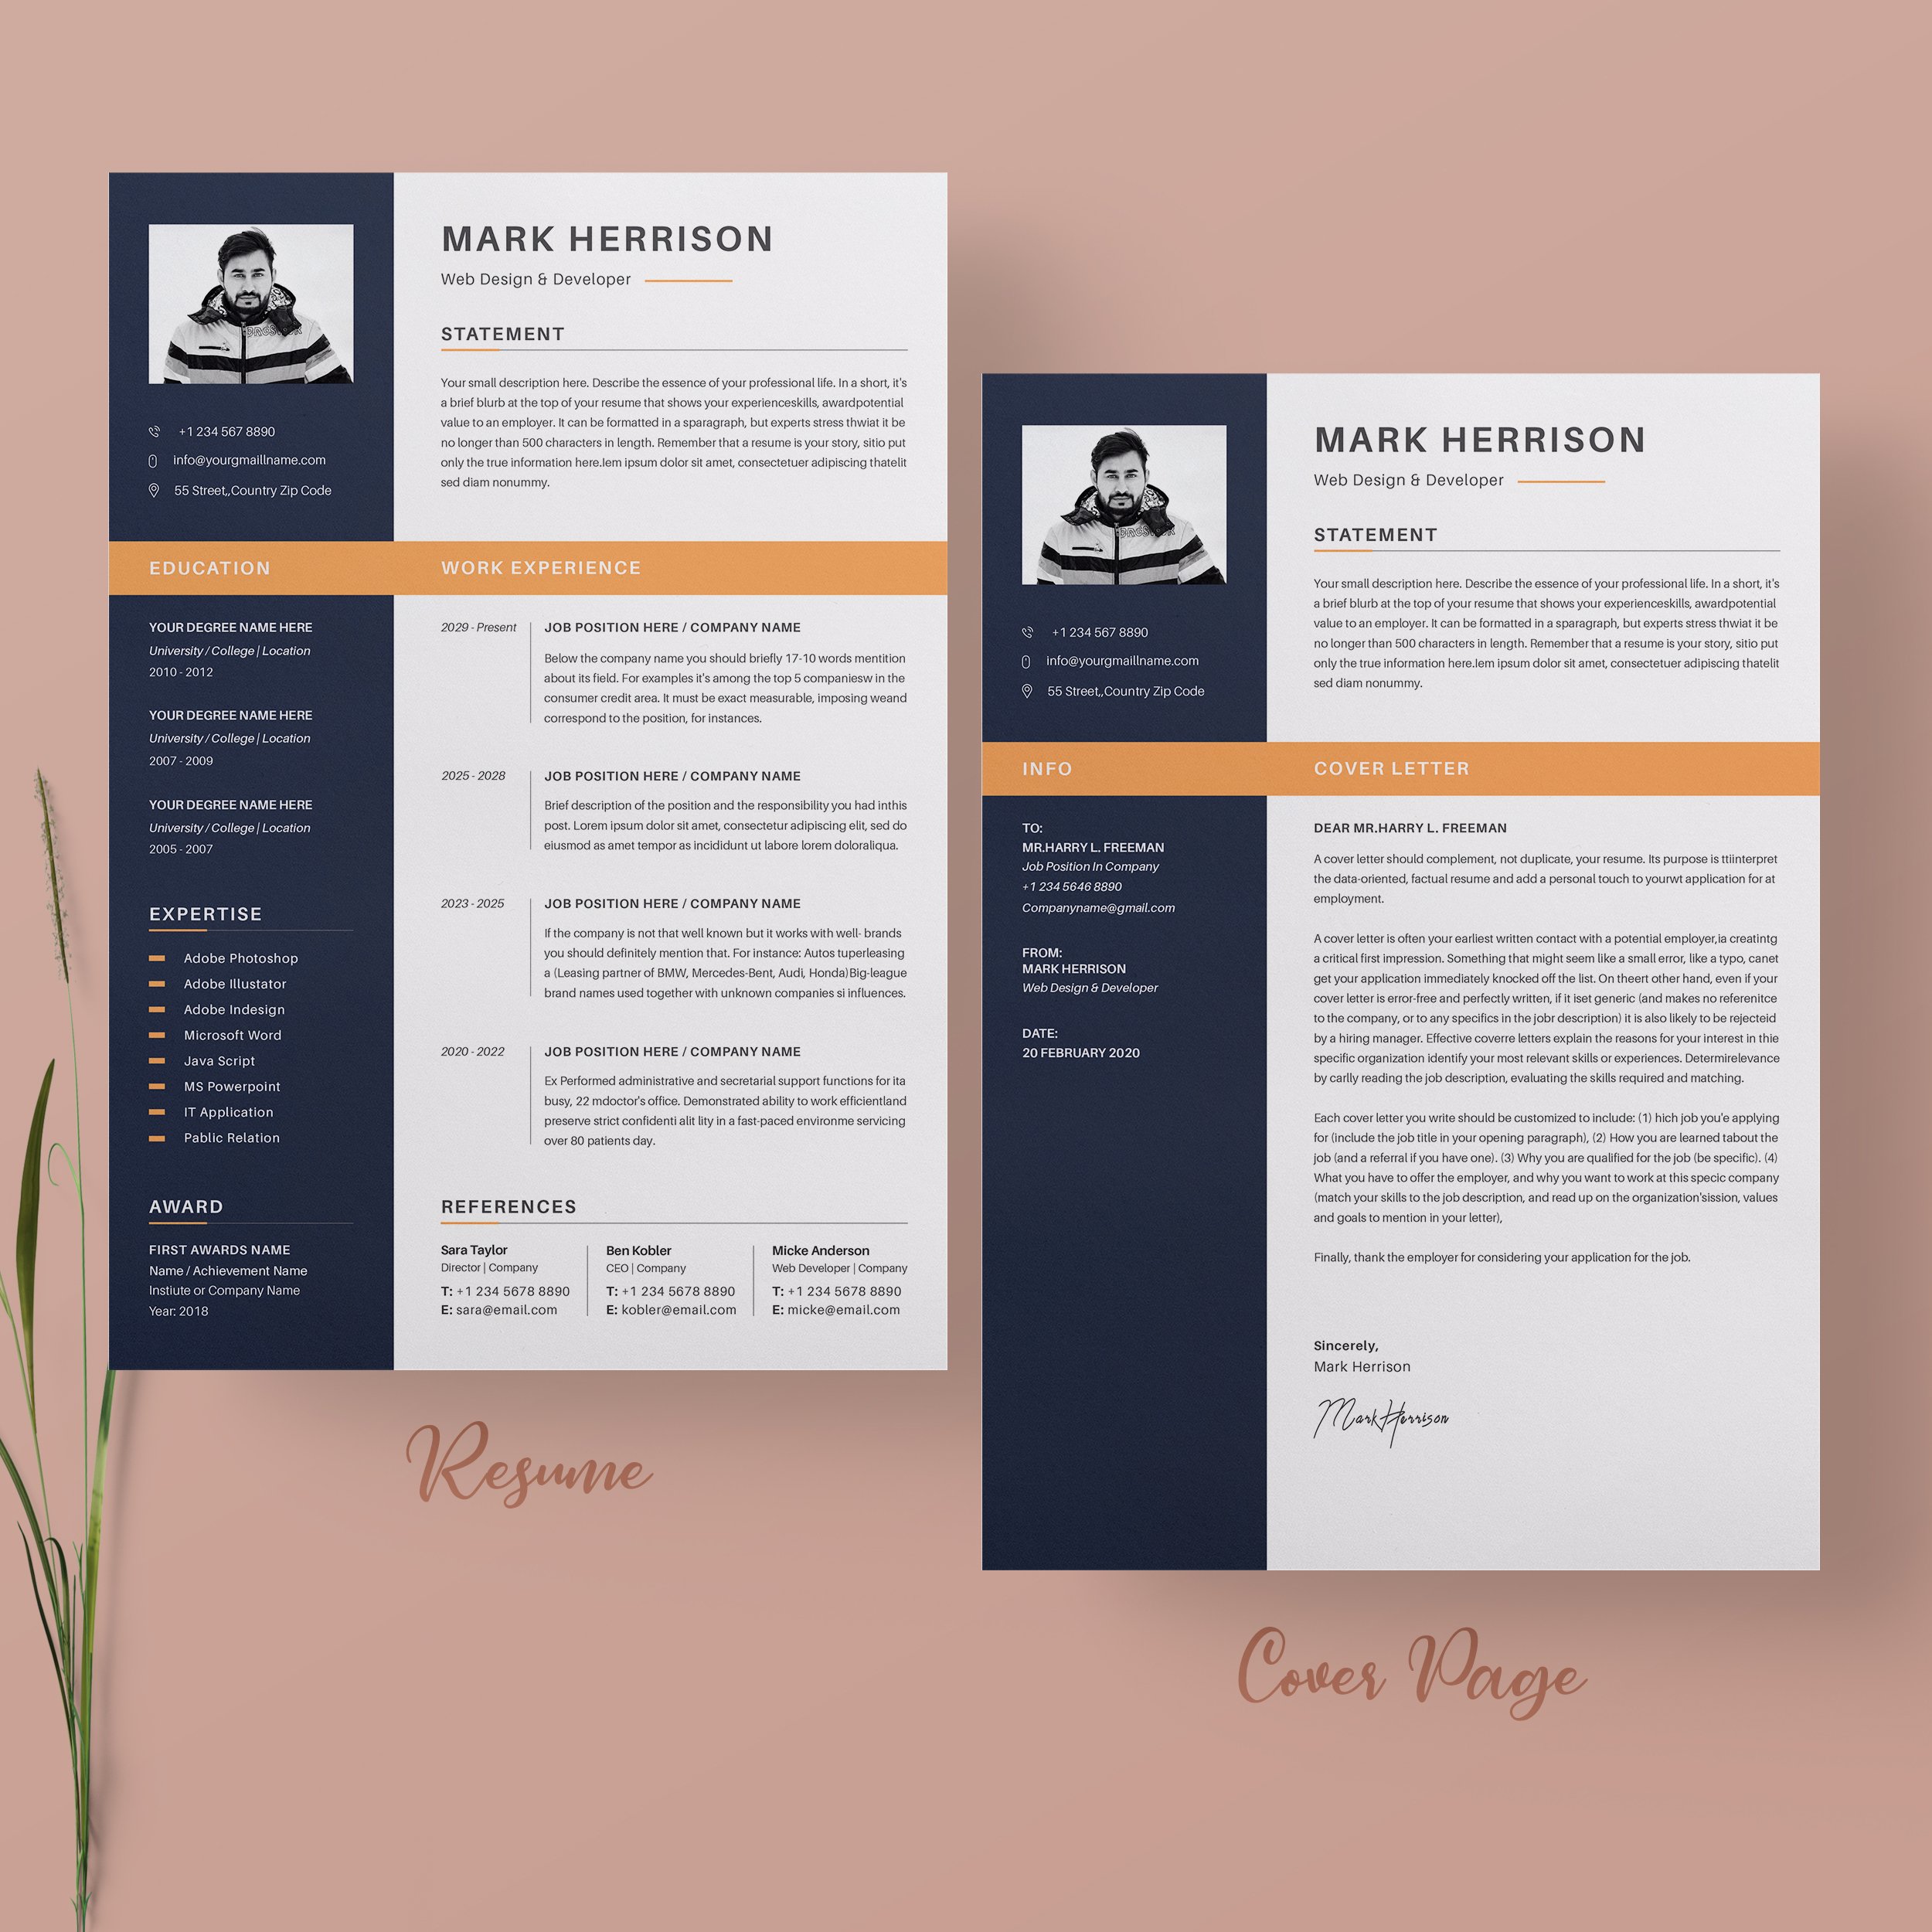 Two professional resume templates on a pink background.